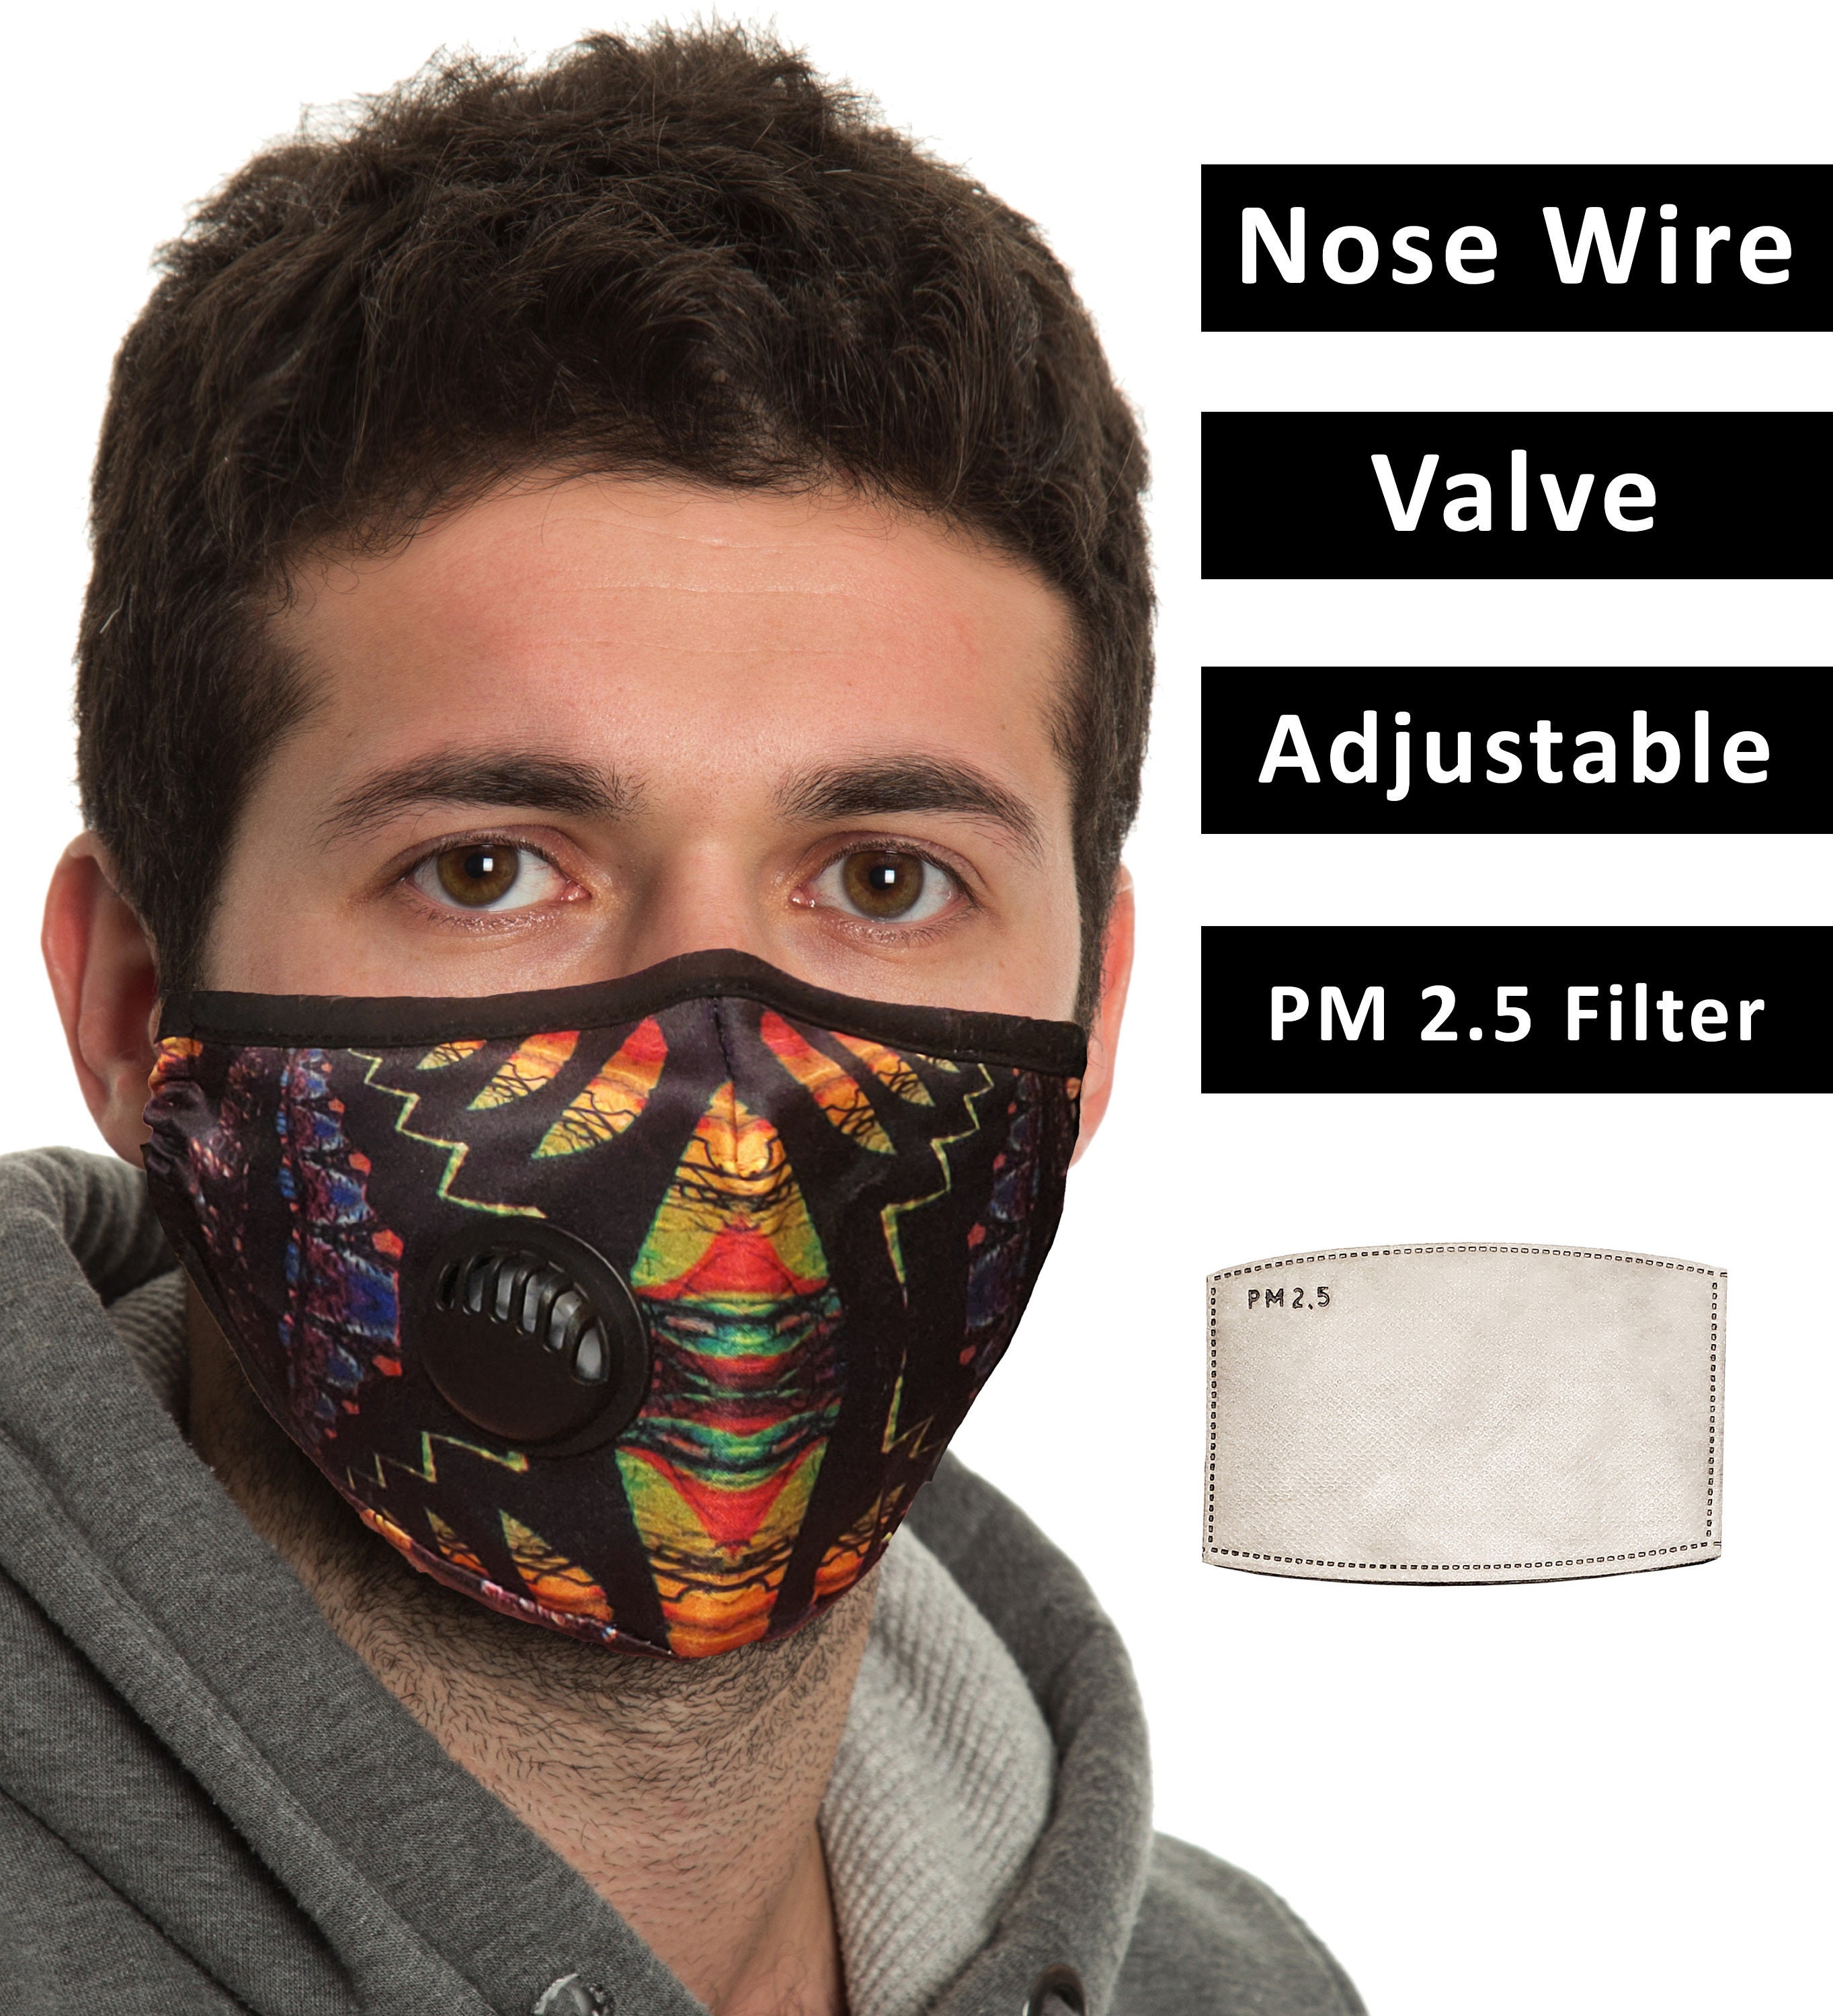 Face Mask + Filter Pm 2.5, Poly Cotton Blend, Adjustable Elastic Earloops Metal Nose Clip, Re-Usable, Small, Medium Adult, Fast Shipping Usa